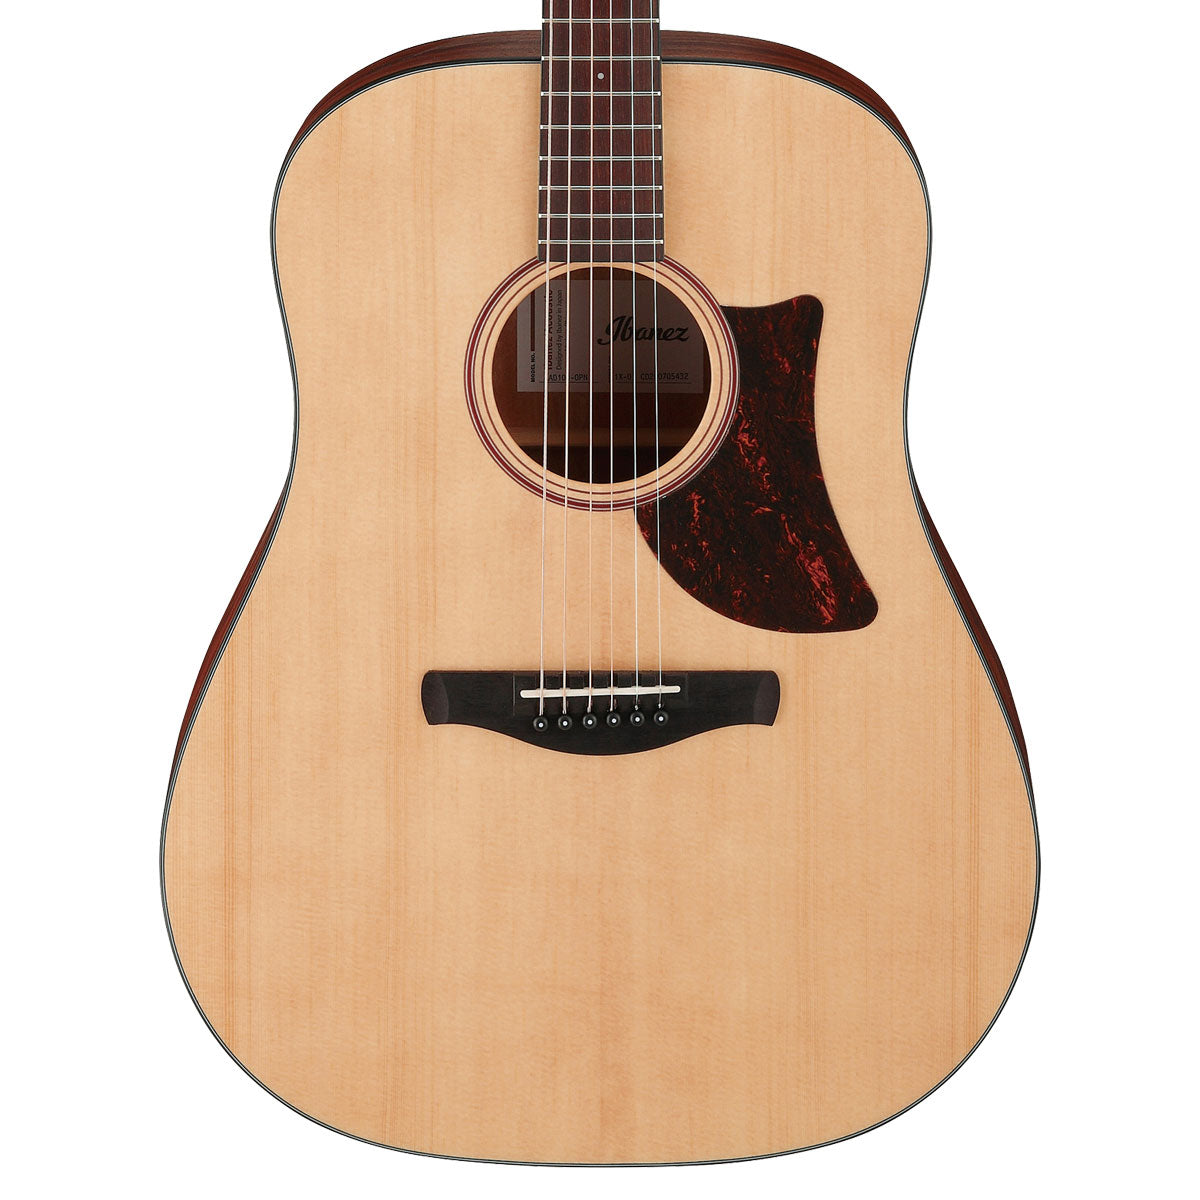 Close-up top view of Ibanez AAD100 Acoustic Guitar - Open Pore Natural showing body and portion of fingerboard